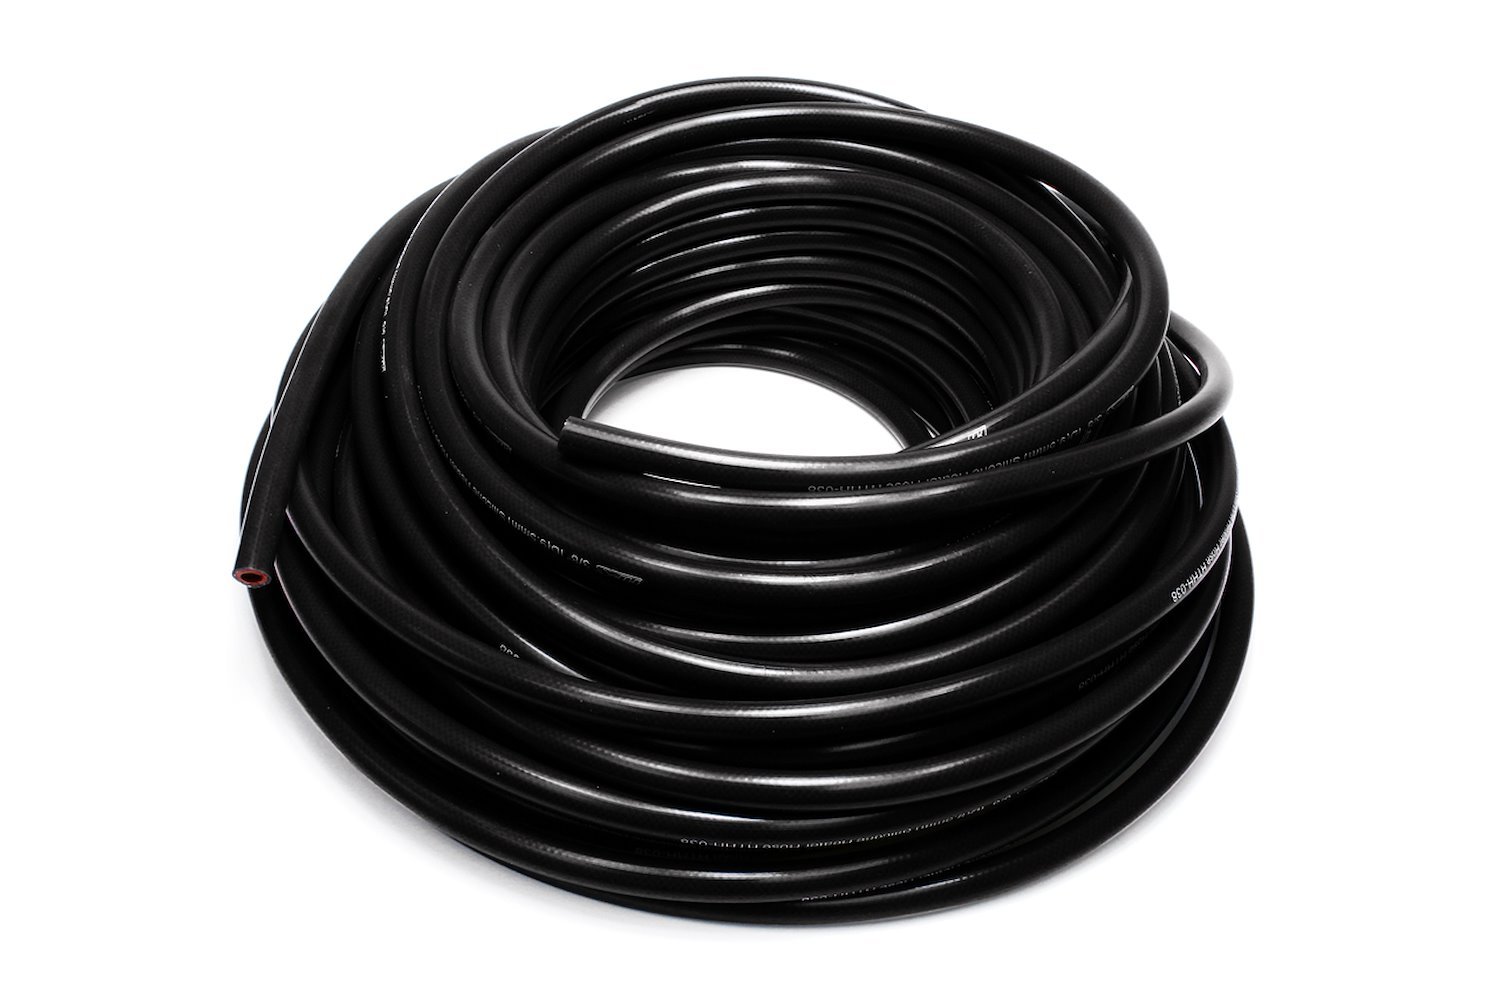 HTHH-013-BLKx100 Silicone Heater Hose Tubing, High-Temp Reinforced, 1/8 in. ID, 100 ft. Roll, Black